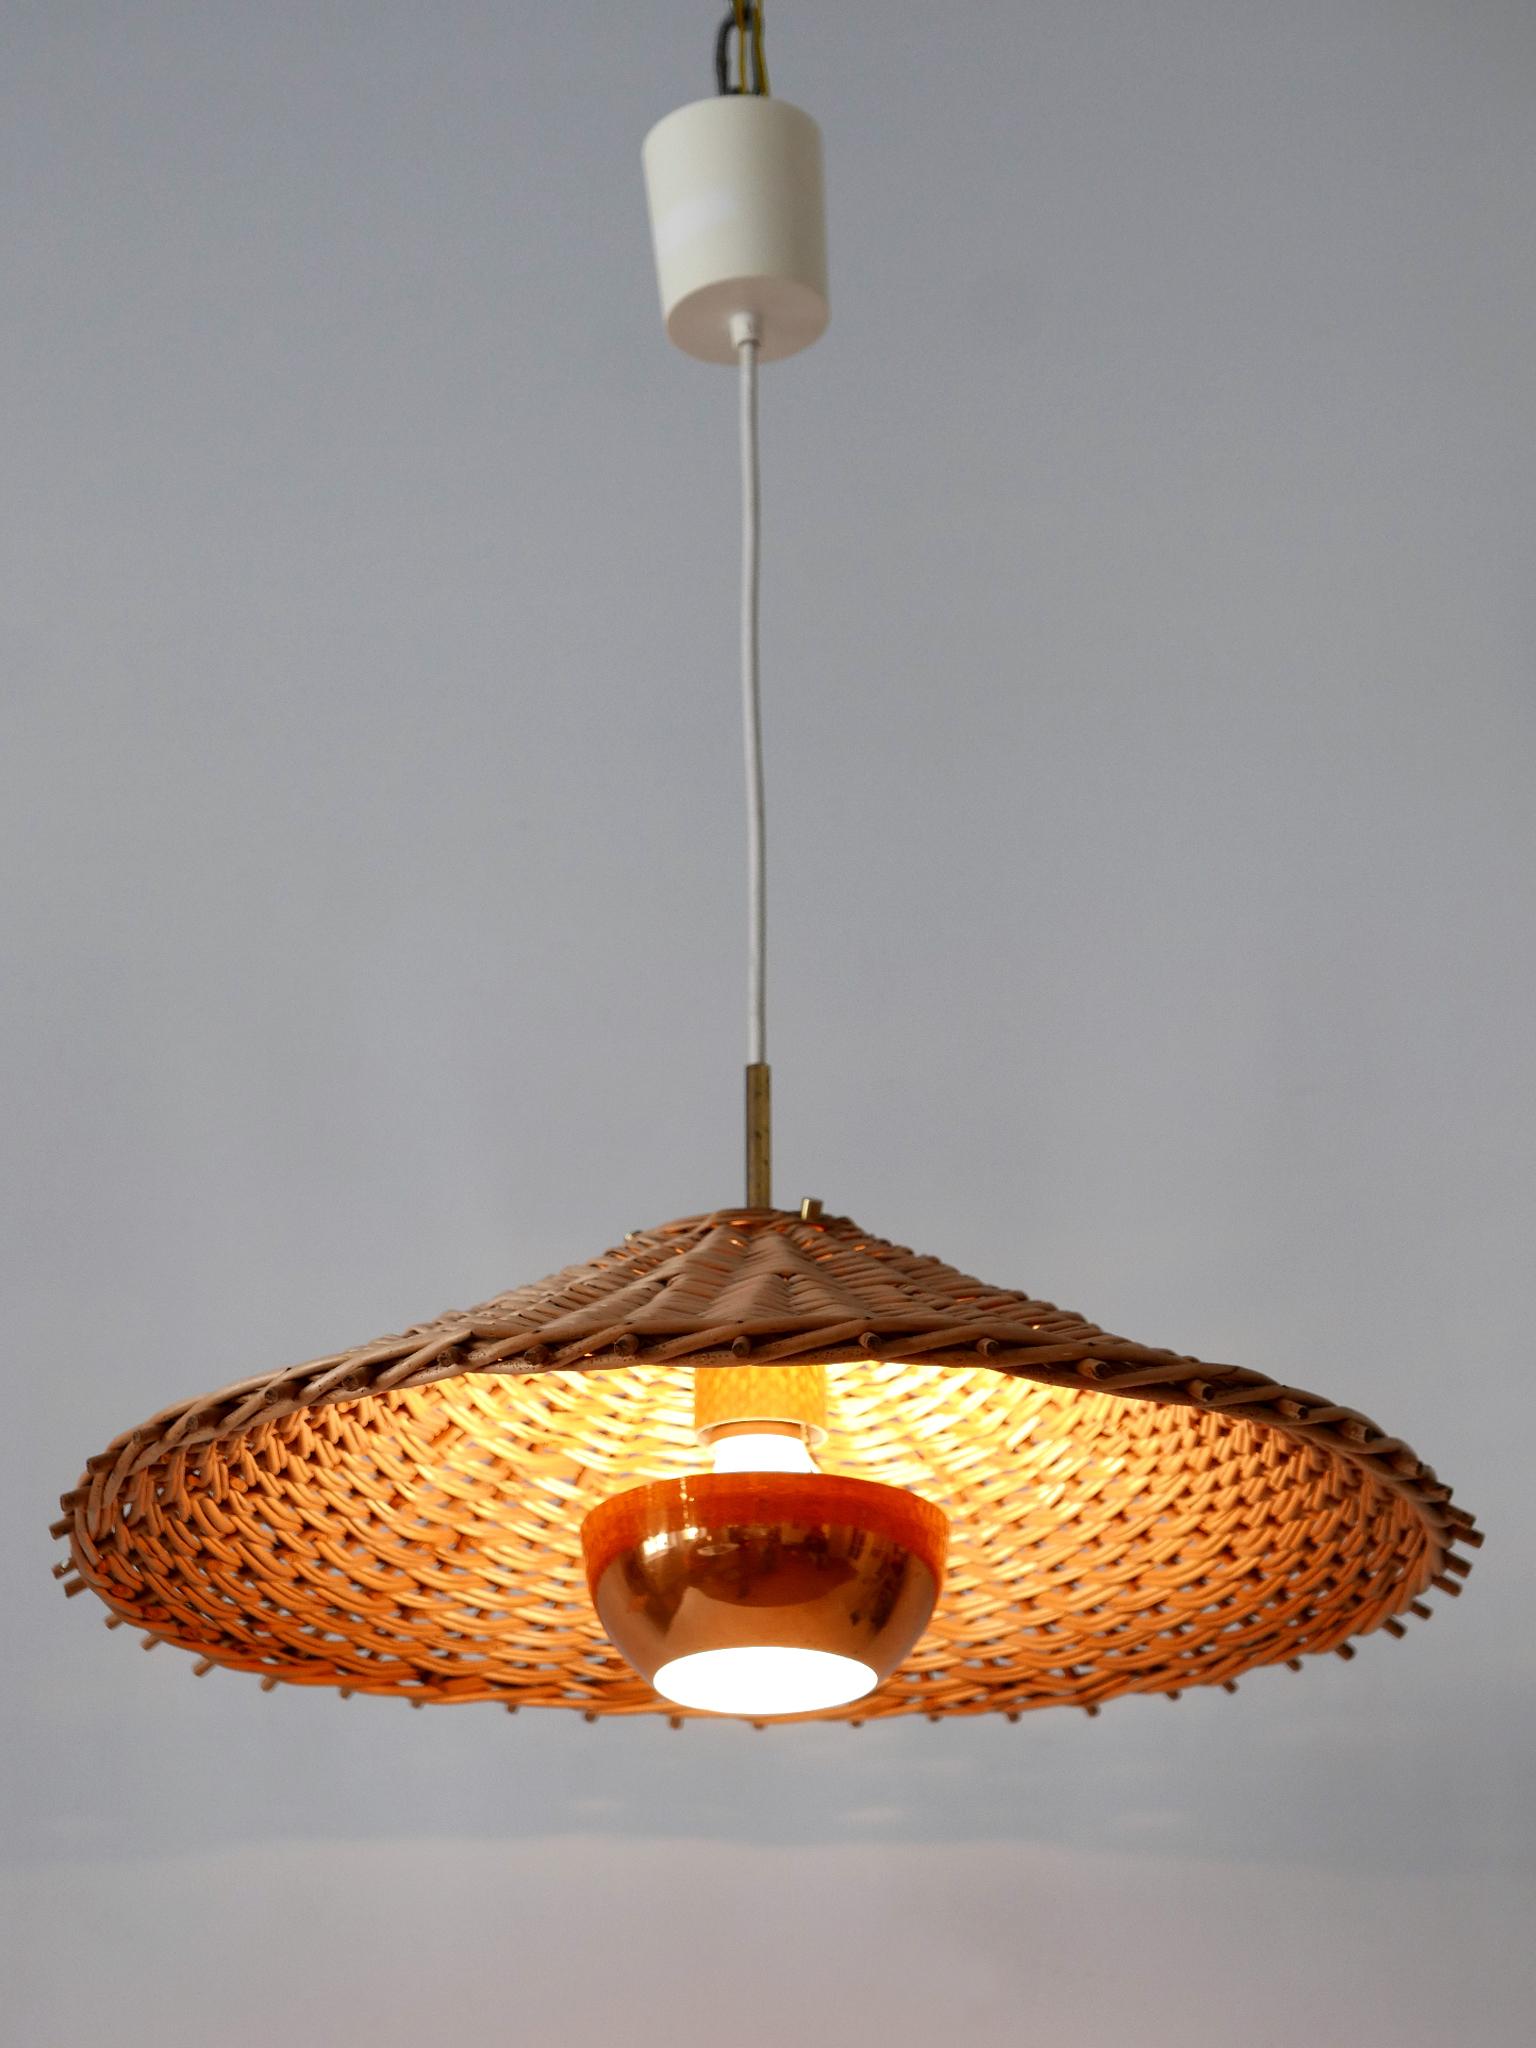 Extremely rare, lovely and highly decorative Mid-Century Modern pendant lamp. Designed and manufactured probably in Scandinavia, 1960s.

Executed in rattan, brass and copper, the pendant lamp comes with 1 x E27 / E26 Edison screw fit bulb holder, is